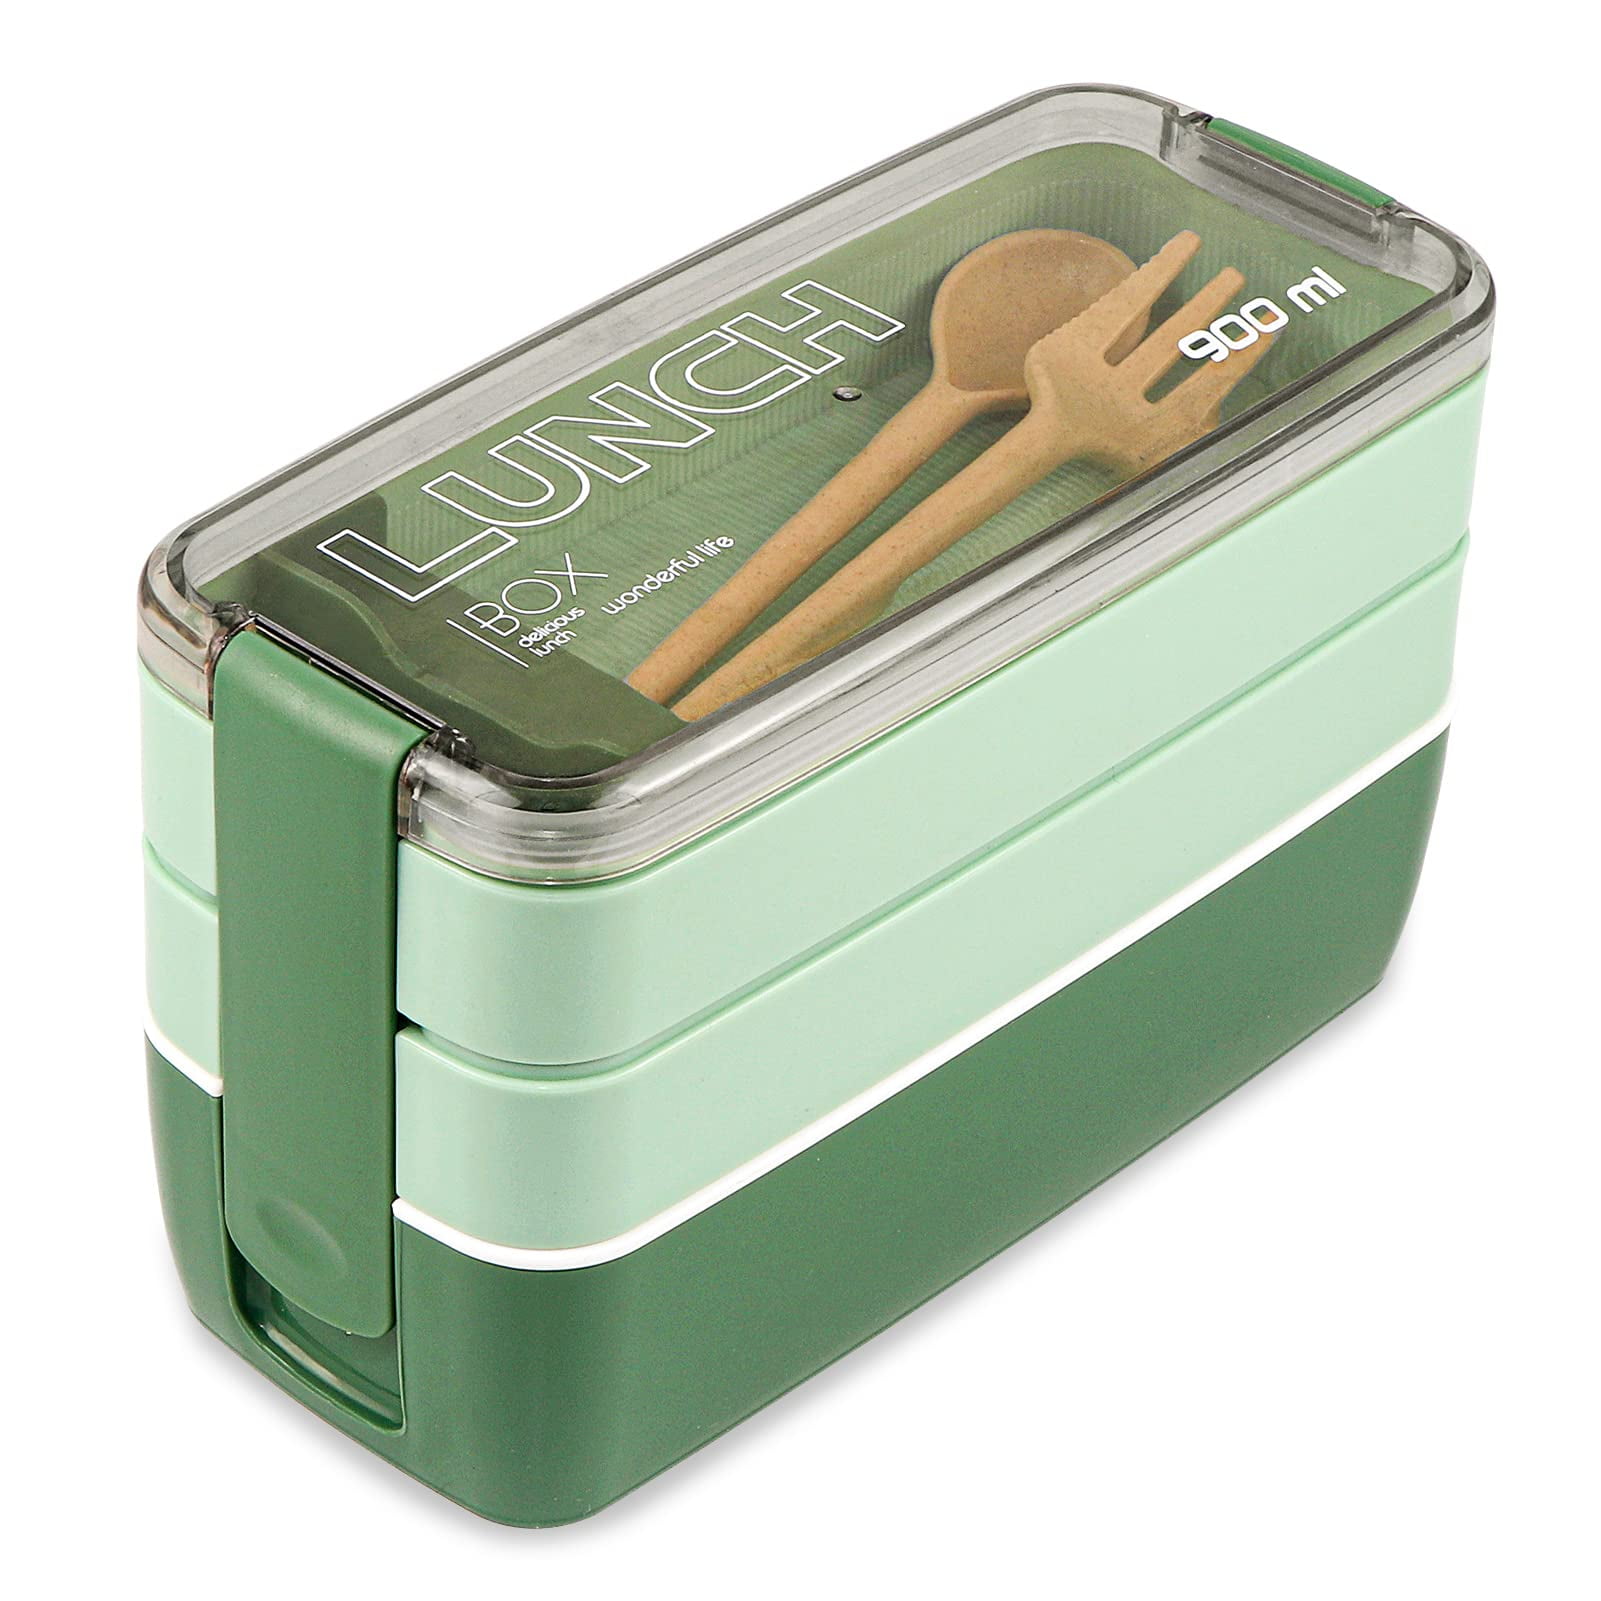 Rarapop Green Stackable Bento Lunch Box Kit, 3-In-1 Compartment Wheat Straw  Lunch Containers with Tableware, Reusable On-the-Go Meal and Snack